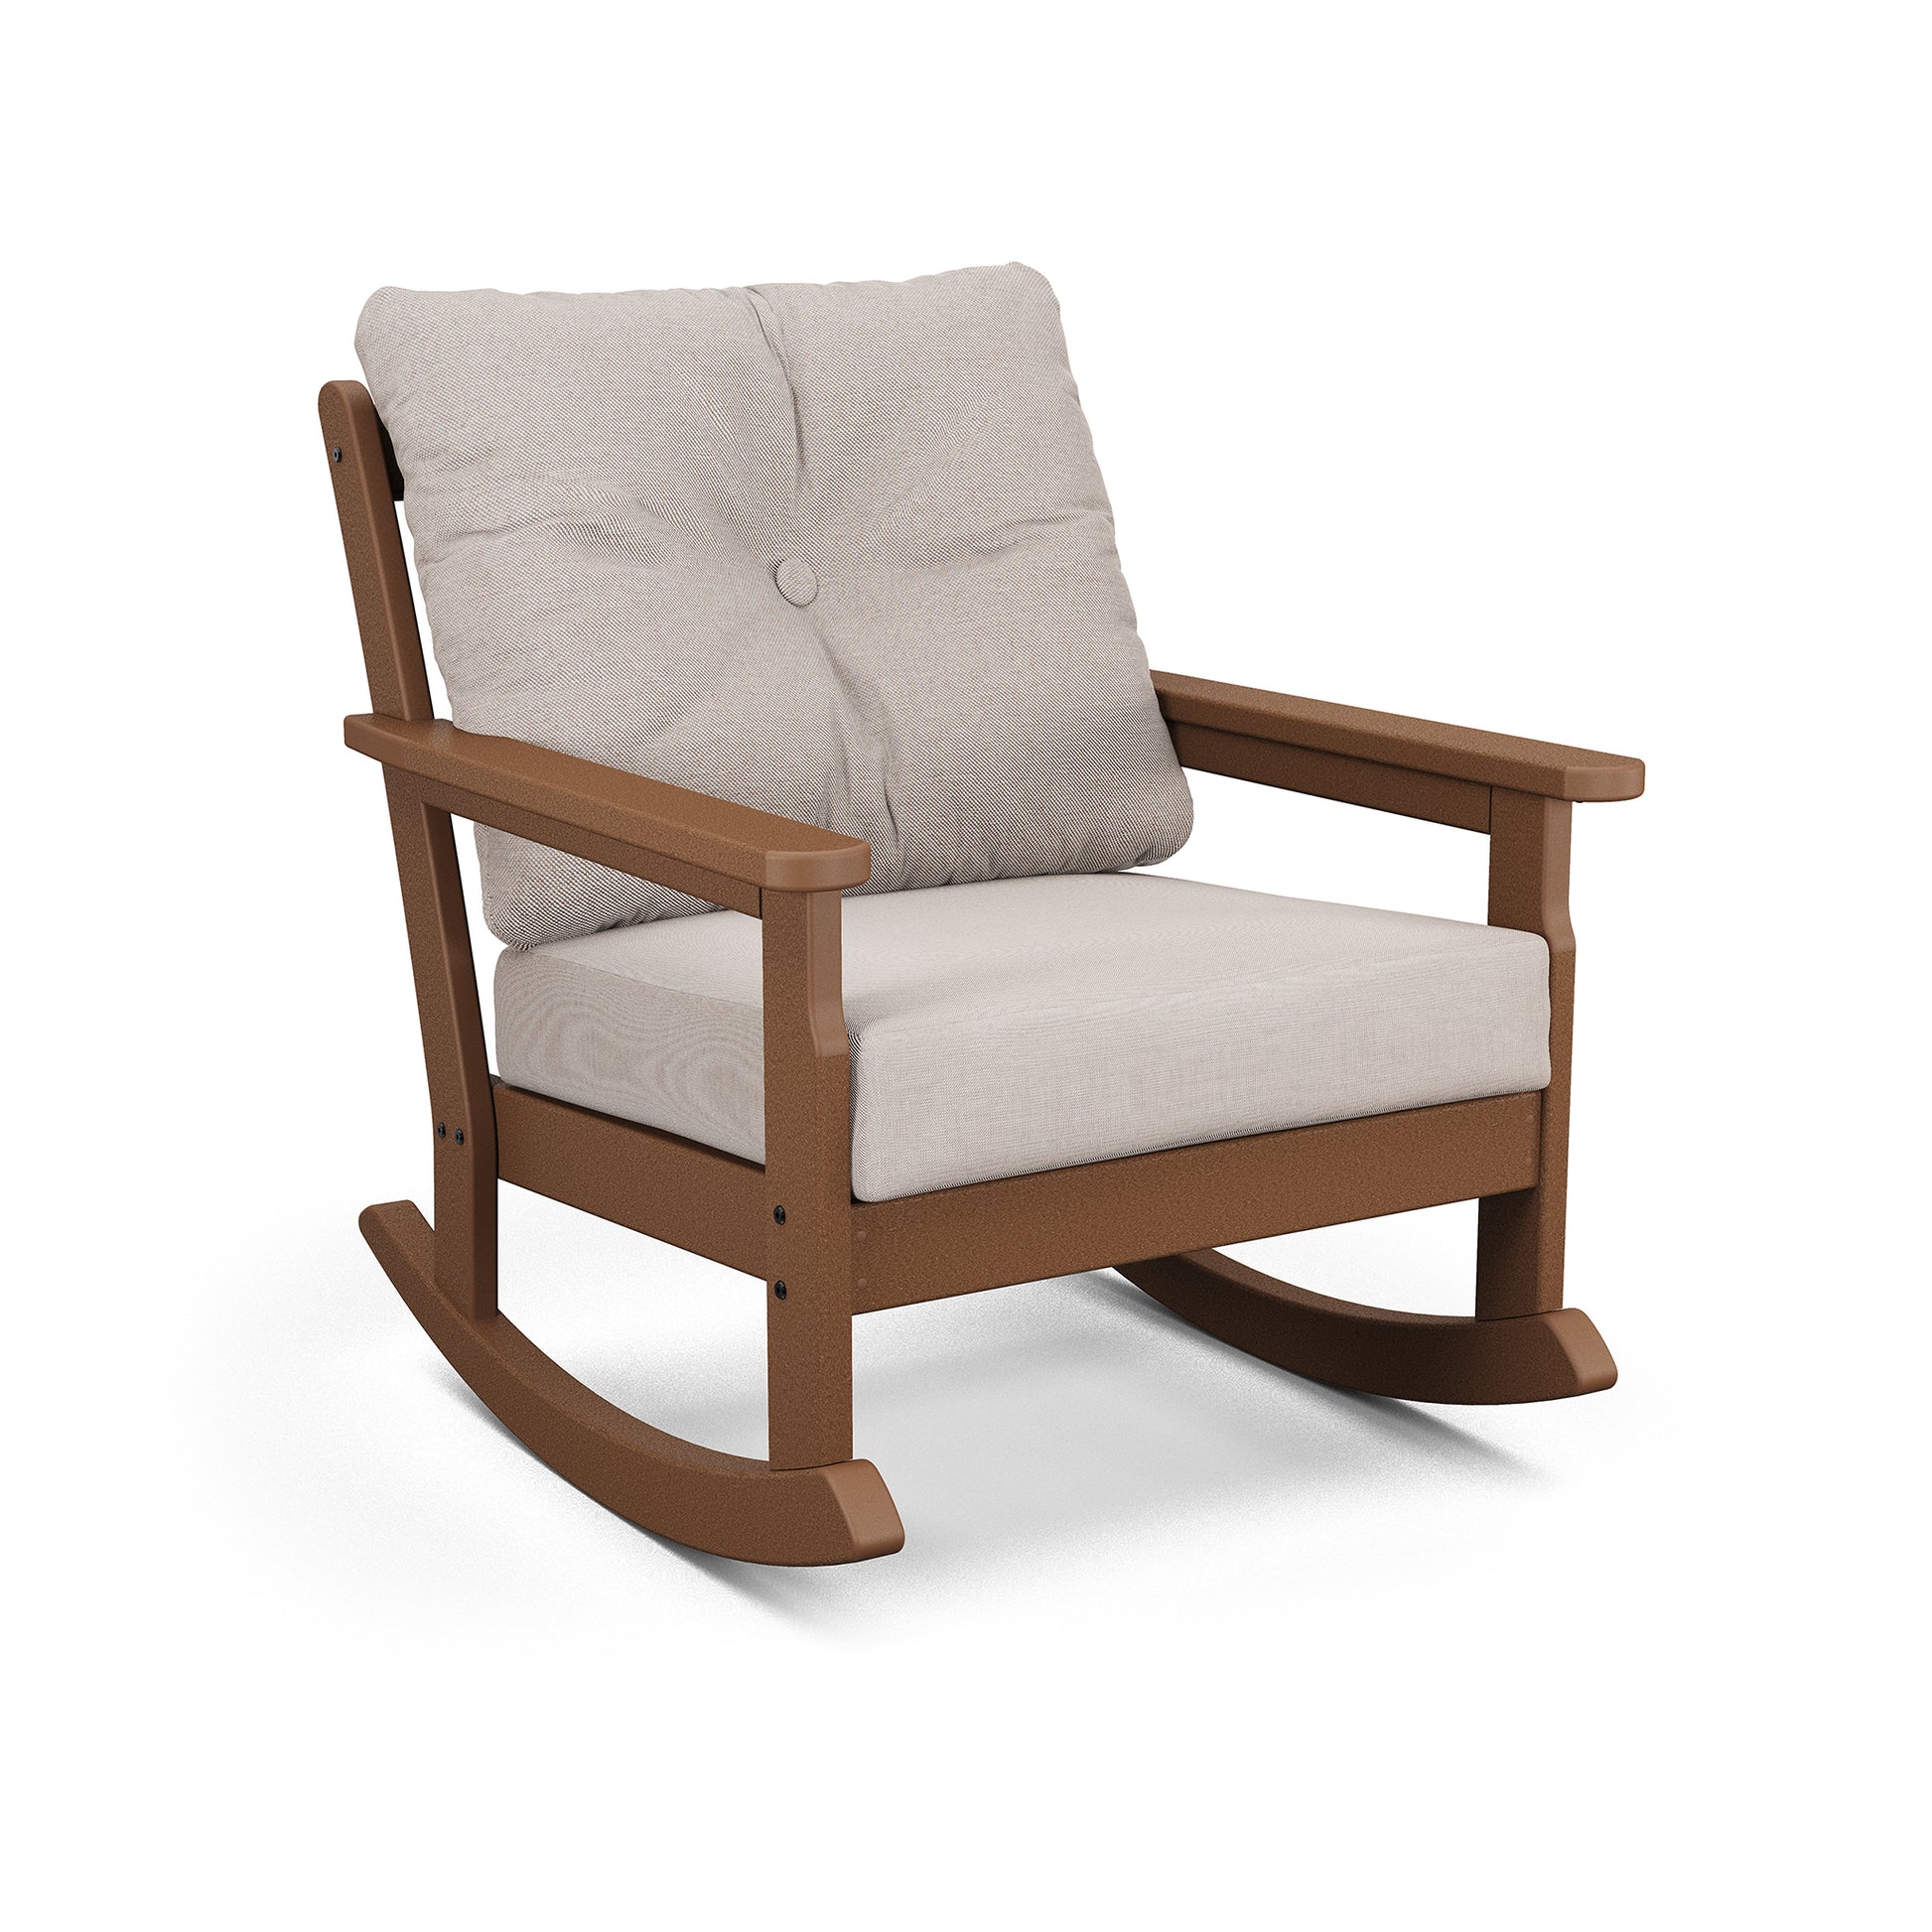 A modern POLYWOOD® Vineyard Deep Seating Rocking Chair with a brown frame and plush, light beige cushions on a white background.